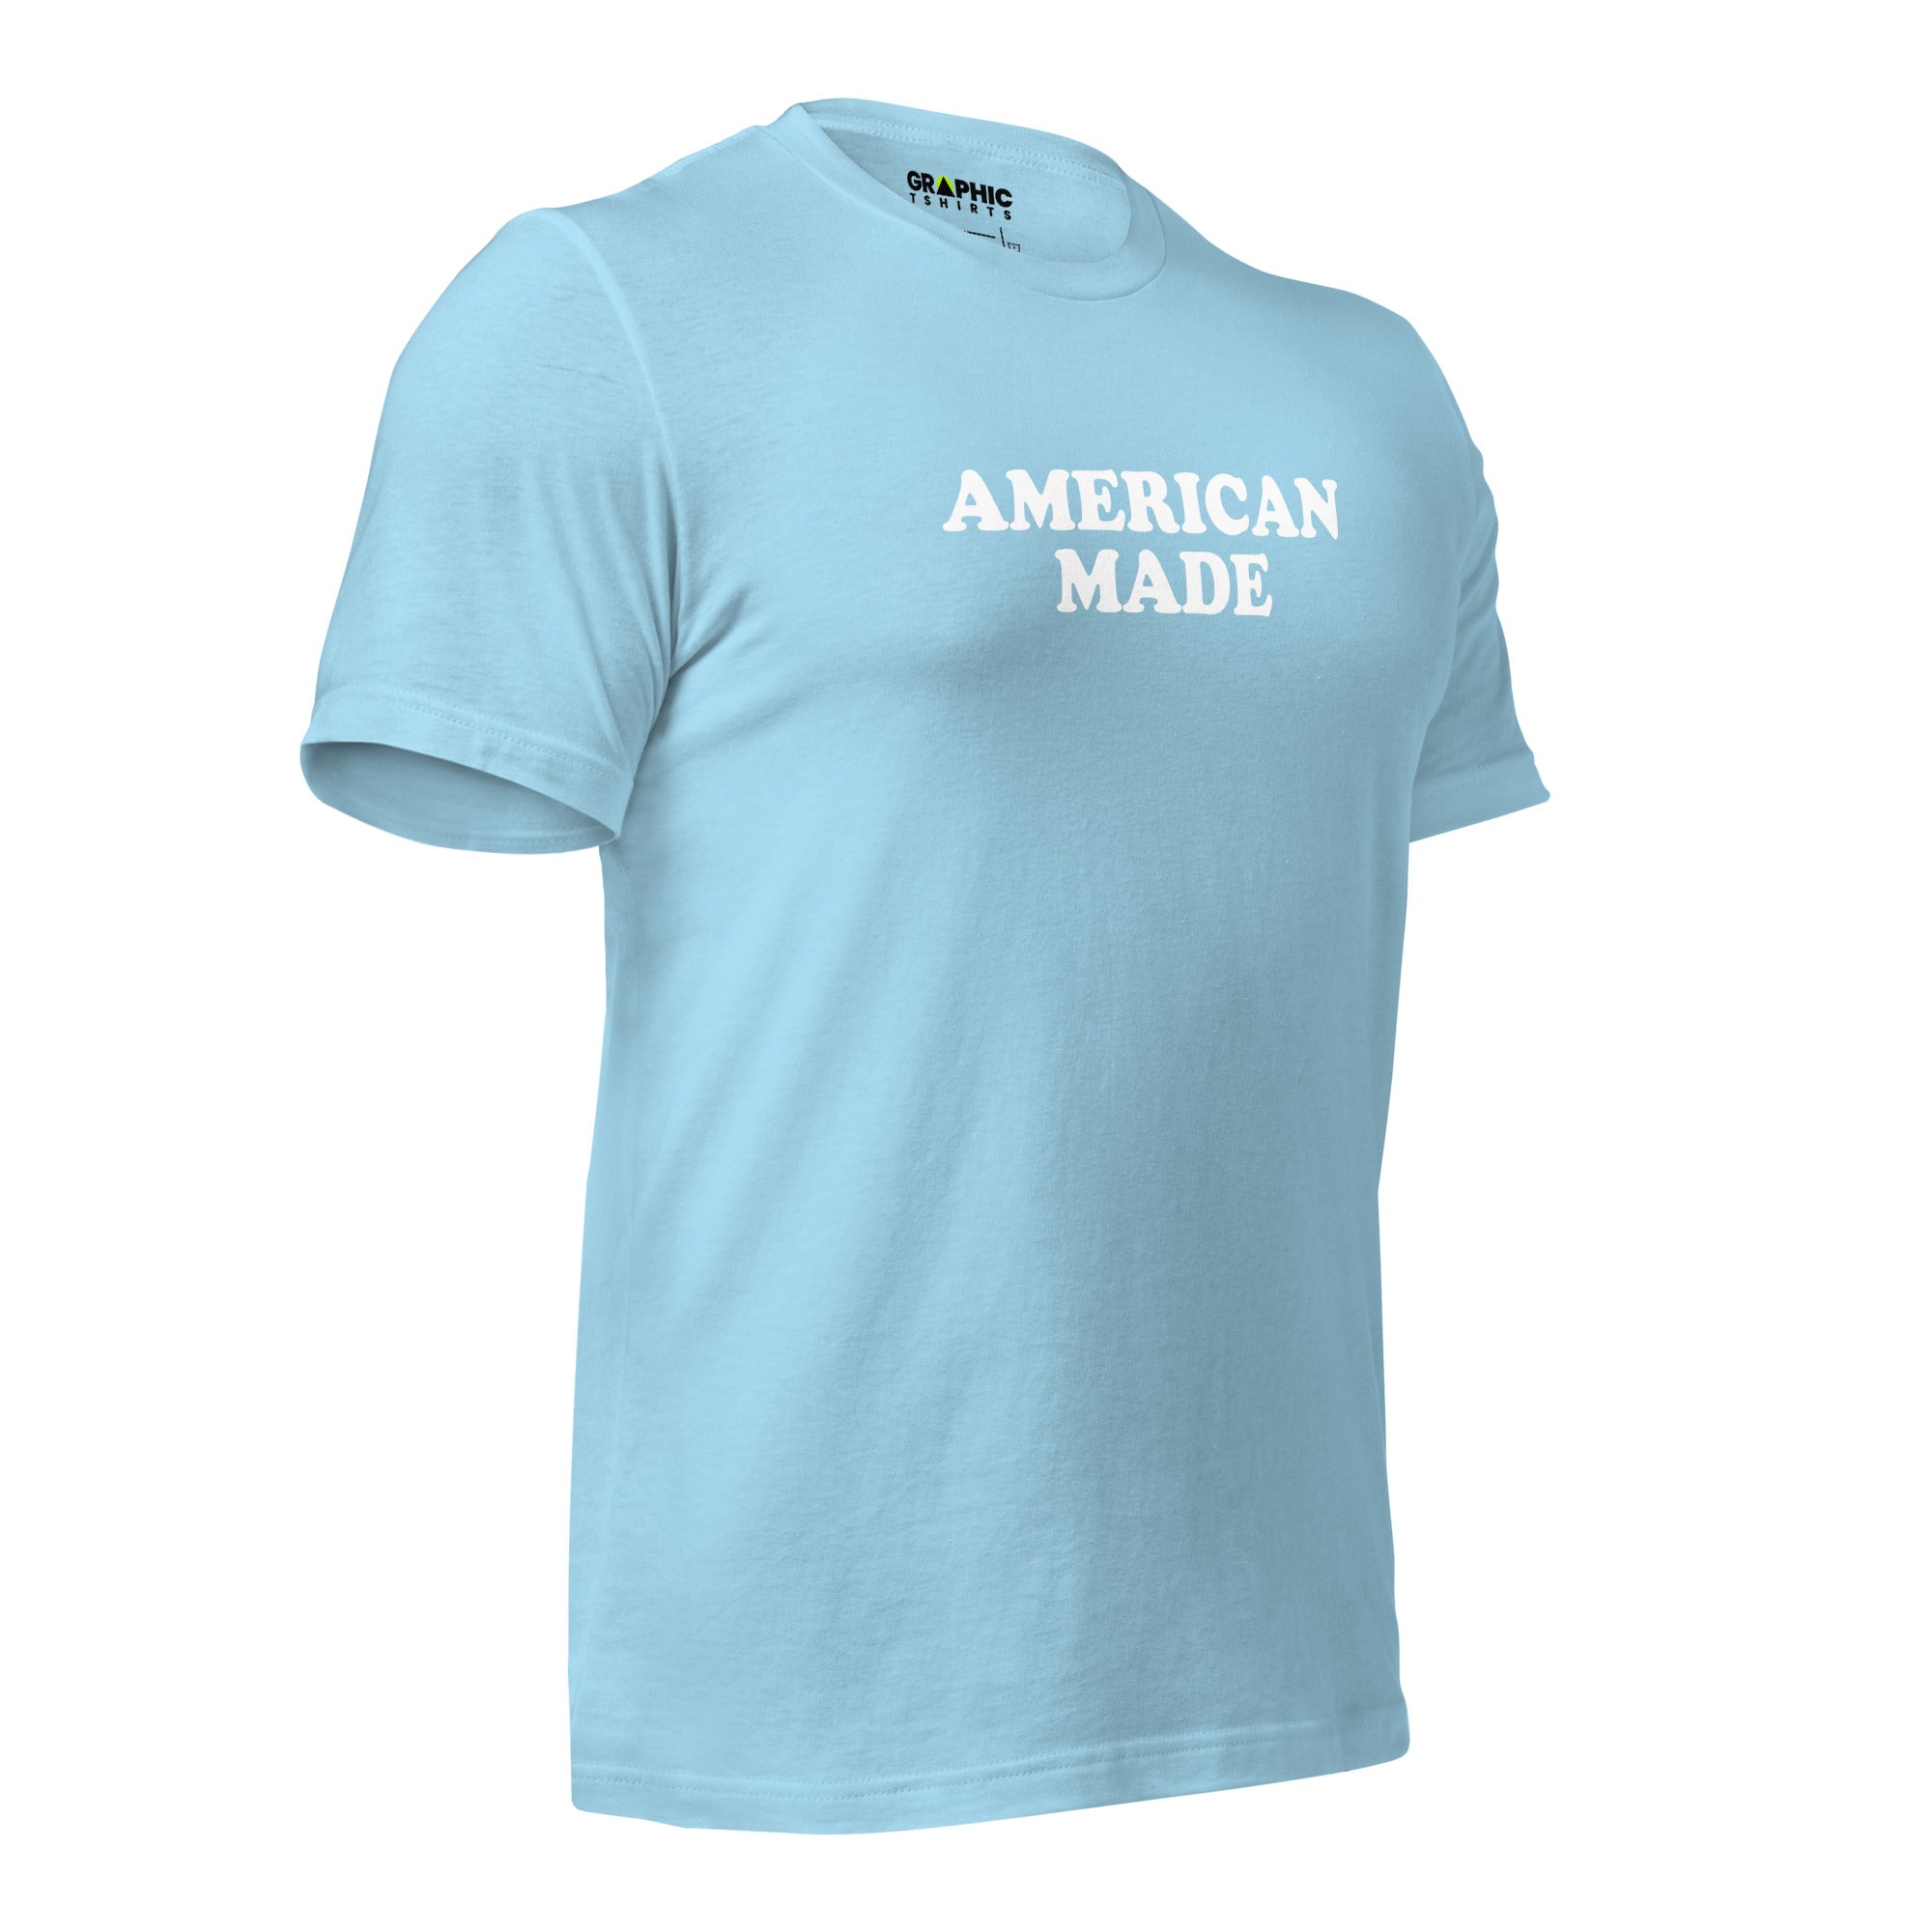 Men's Crew Neck T-Shirt - American Made - GRAPHIC T-SHIRTS